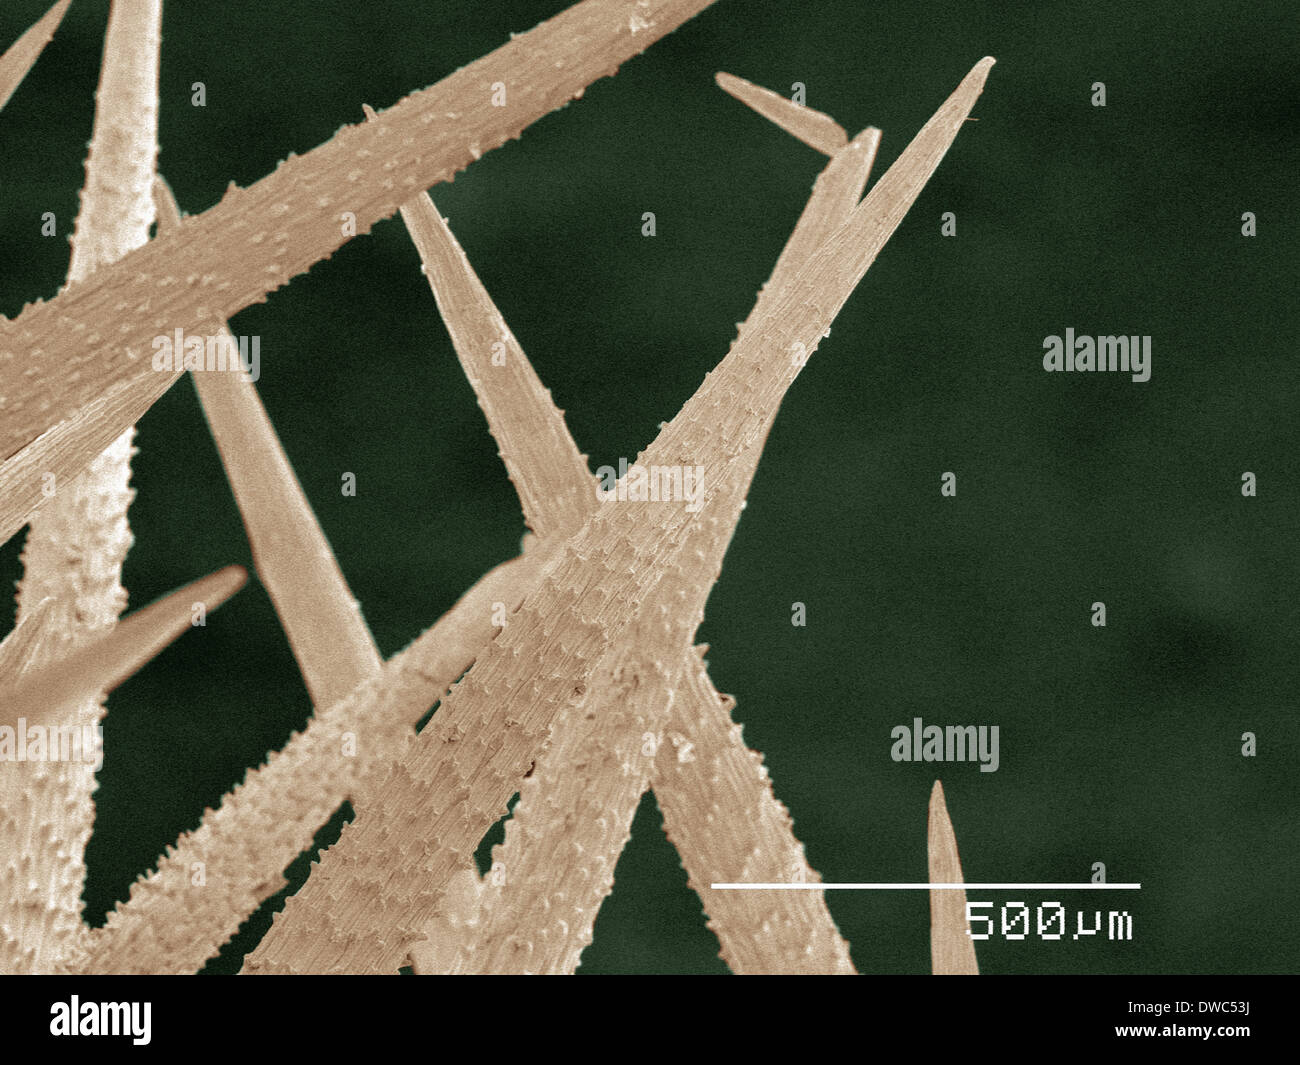 Coloured SEM of cactus spines Stock Photo